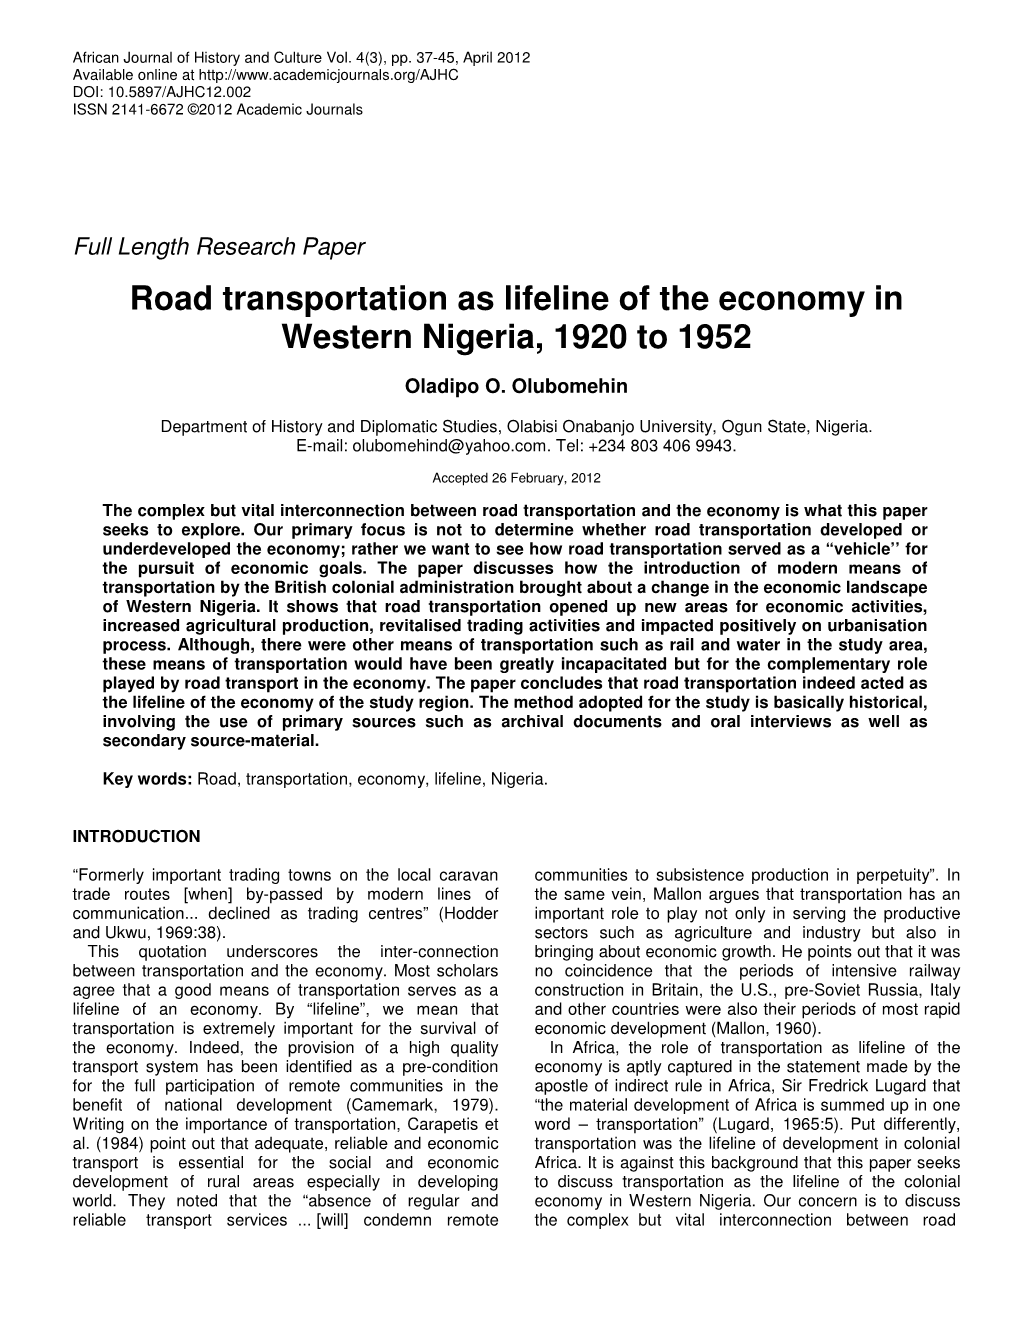 Road Transportation As Lifeline of the Economy in Western Nigeria, 1920 to 1952